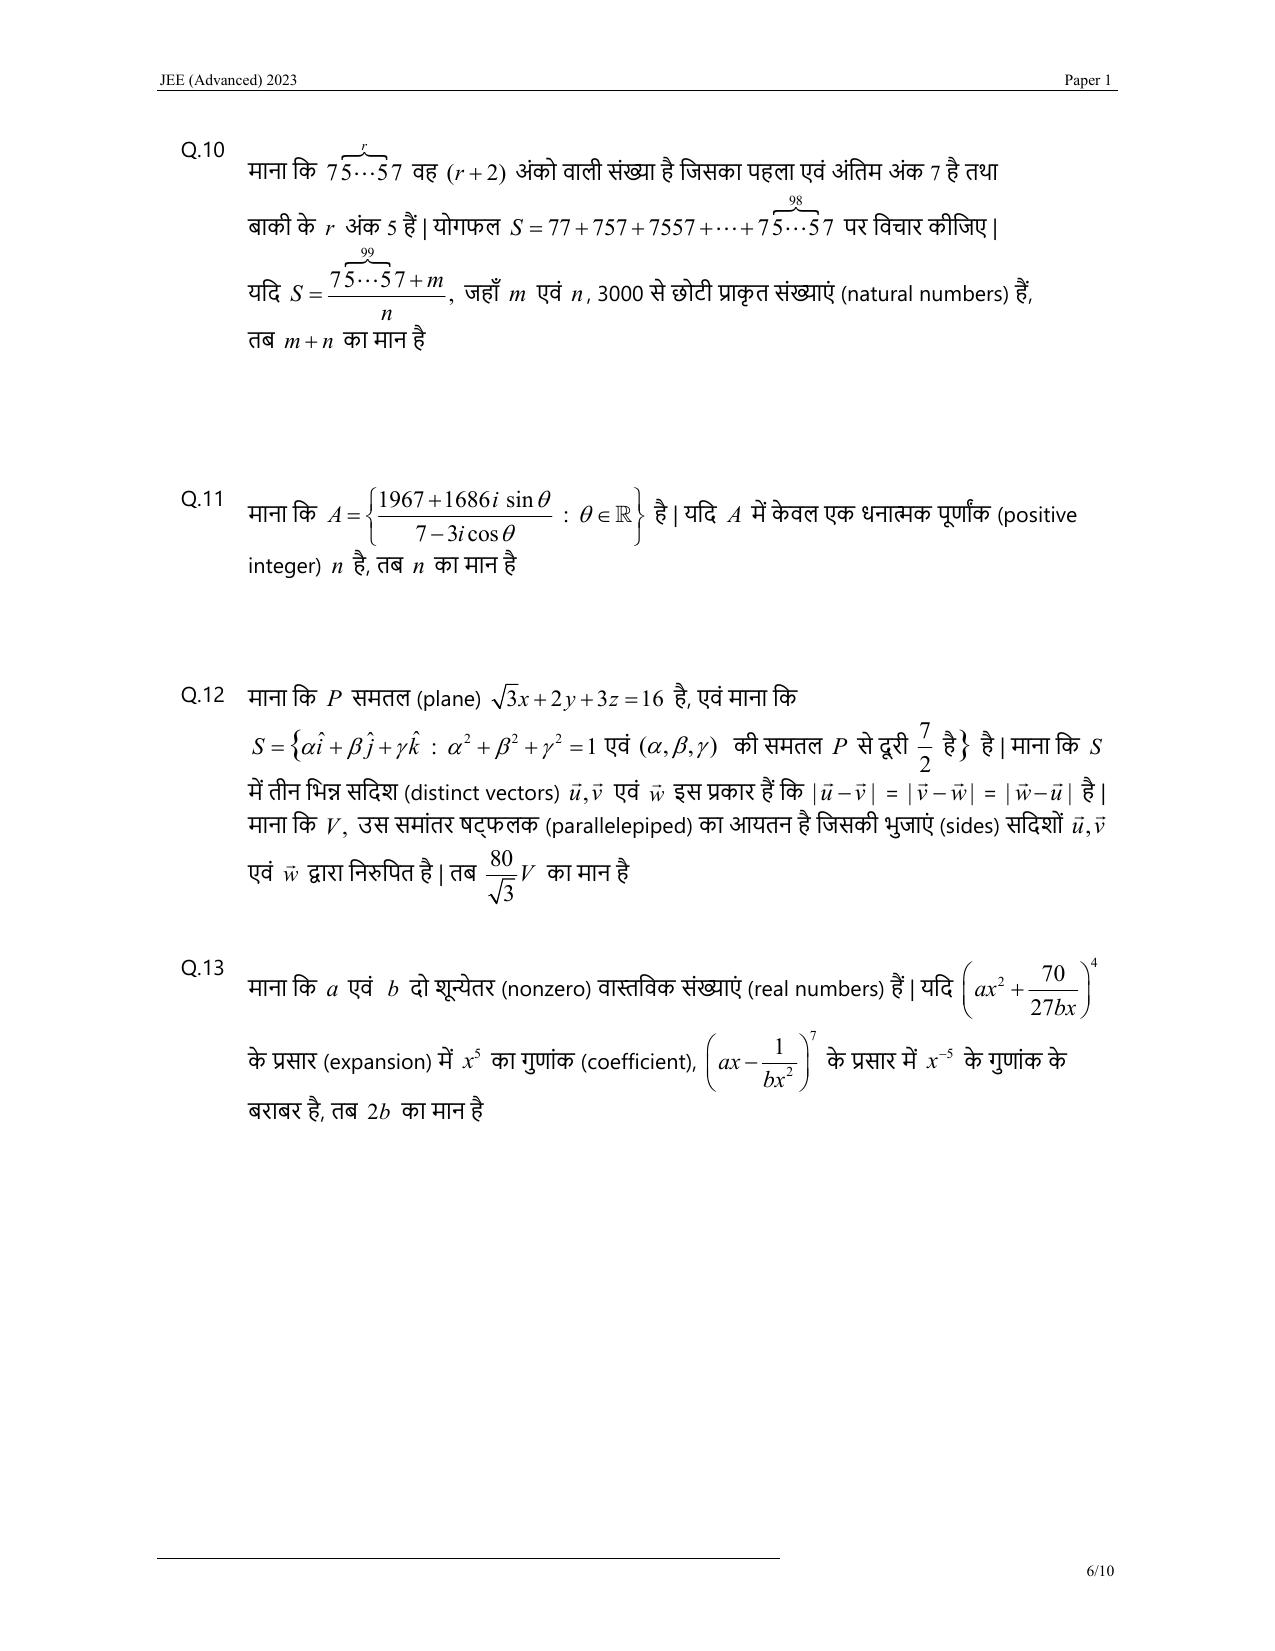 JEE Advanced 2023 Question Paper 1 (Hindi) - Page 6